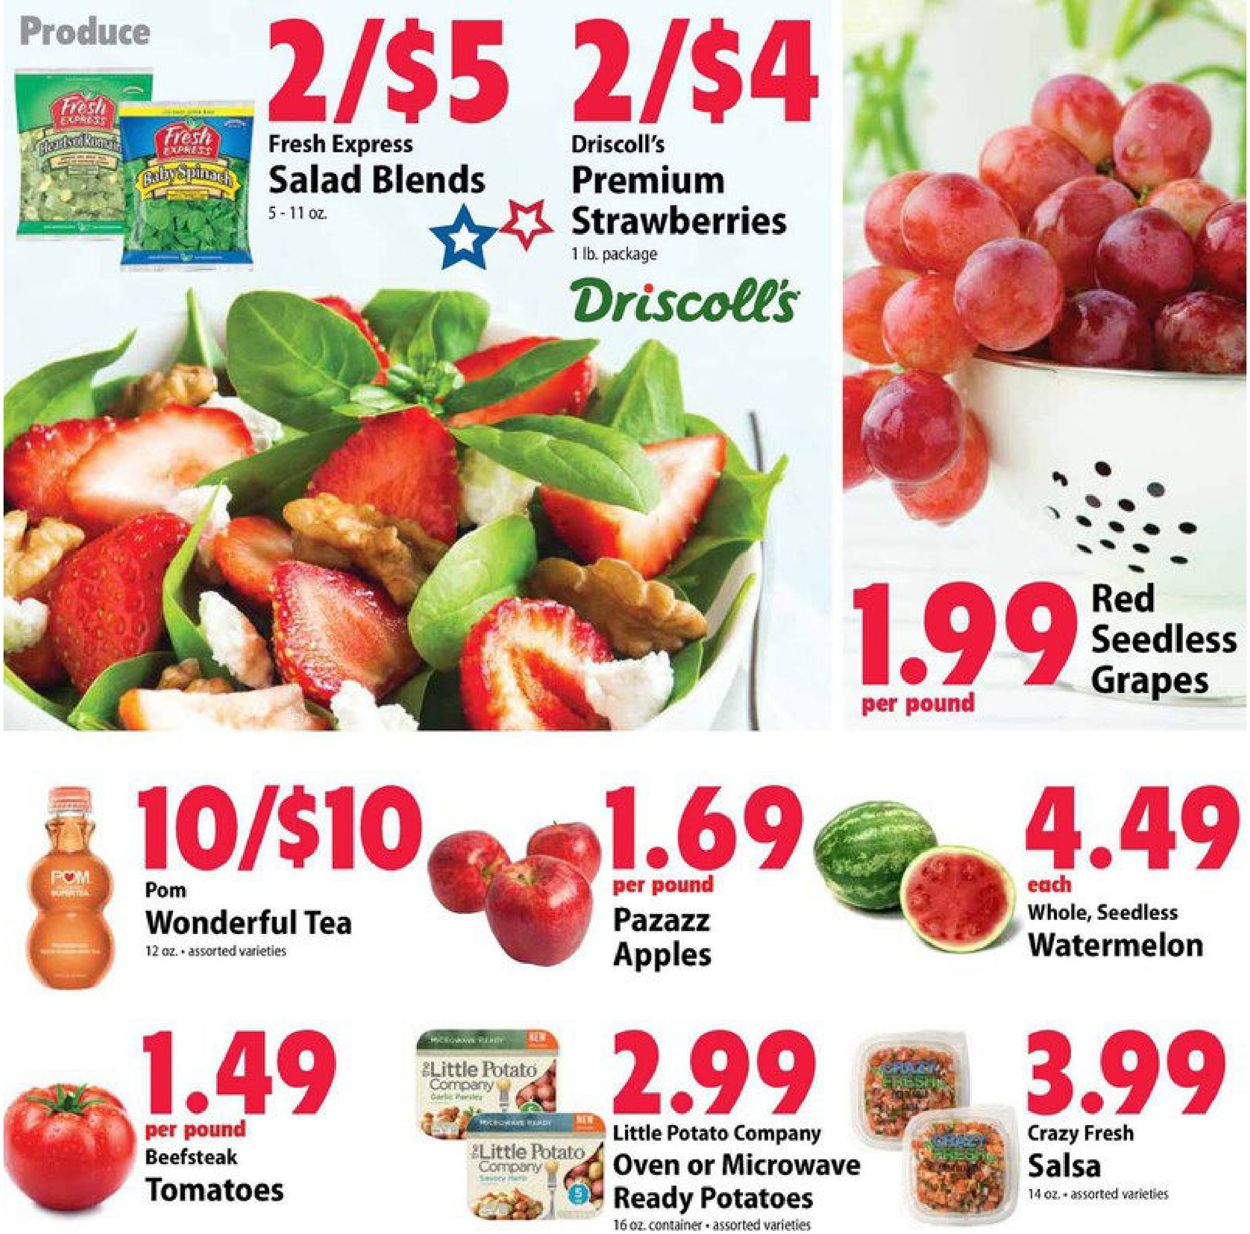 Festival Foods Current weekly ad 05/22 - 05/28/2019 [3] - frequent-ads.com